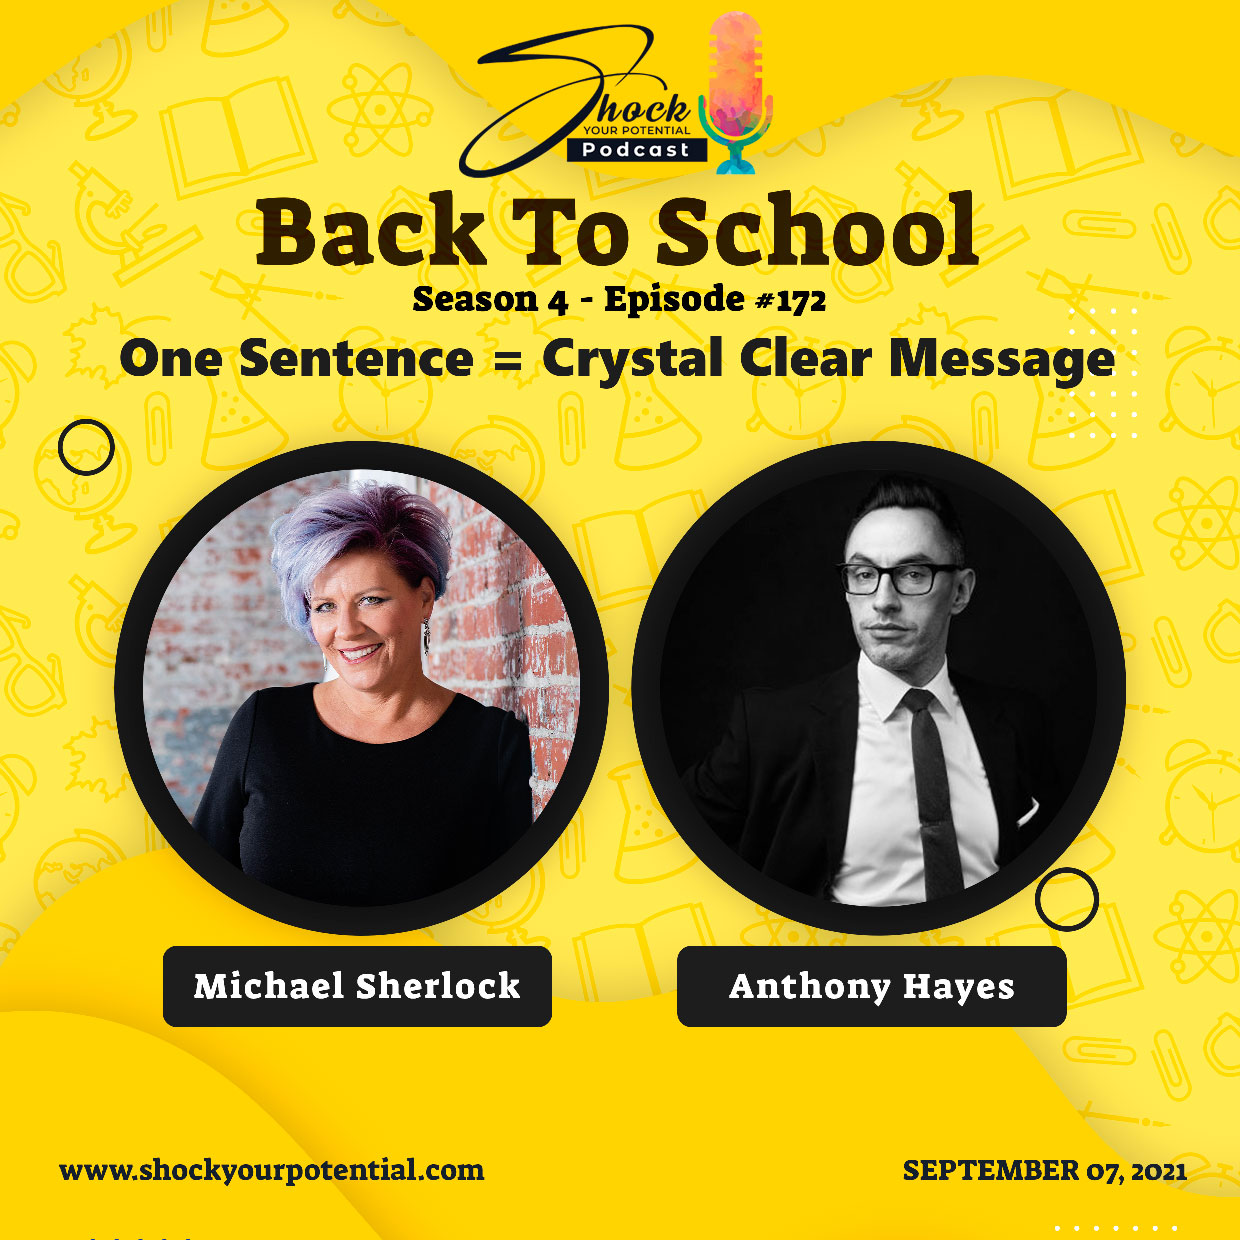 One Sentence = Crystal Clear Message – Anthony Hayes